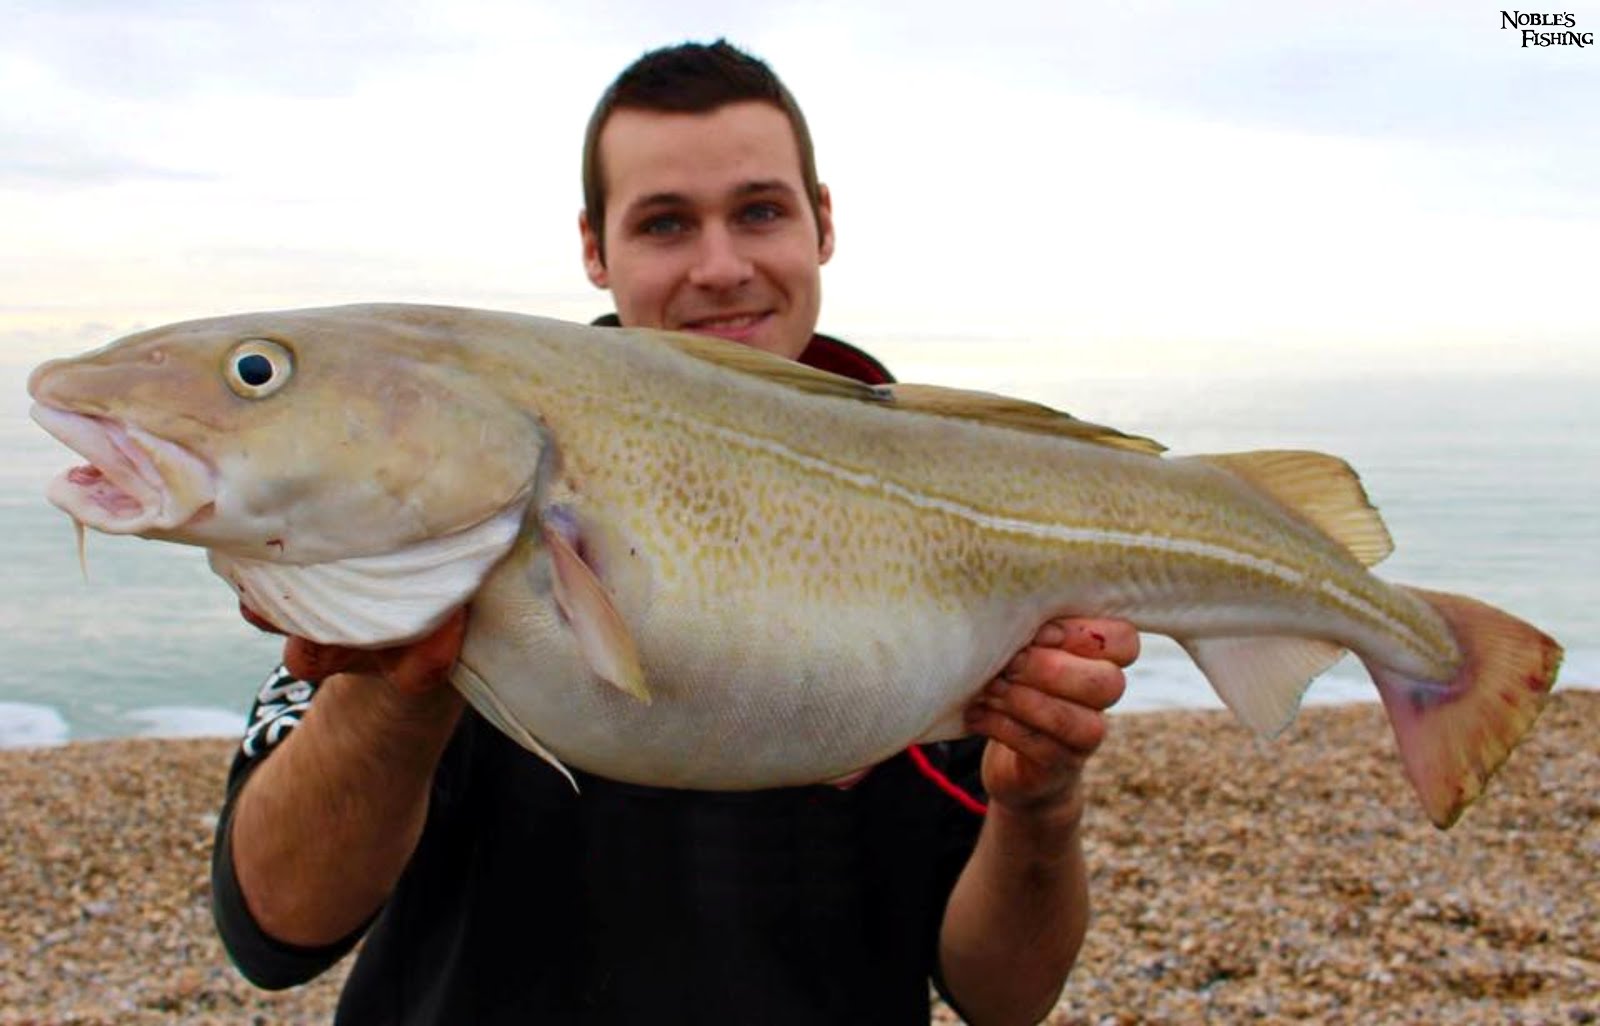 Noble's Fishing - Hints & Tips: Cod fishing from the shore and beach